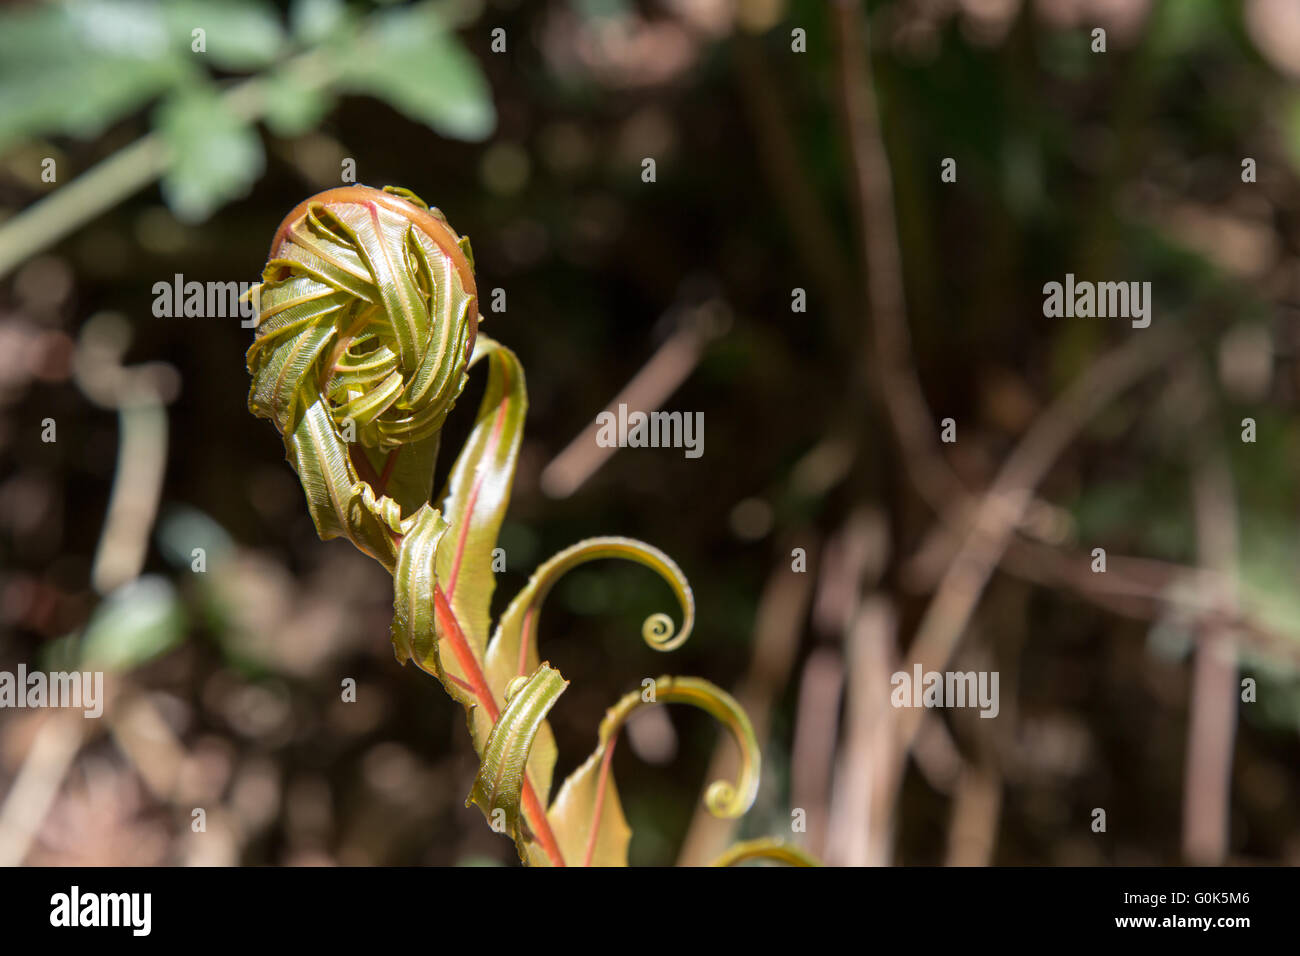 Sao Paulo, Brazil. 1st May, 2016. Xaxim or samambaiaçu (Dicksonia sellowiana) arborescent tree growing fern frond unfurling seen during this sunny day in Cantareira State Park (Portuguese: Parque Estadual da Cantareira) in Sao Paulo, Brazil. Credit: Andre M. Chang/Alamy Live News Stock Photo